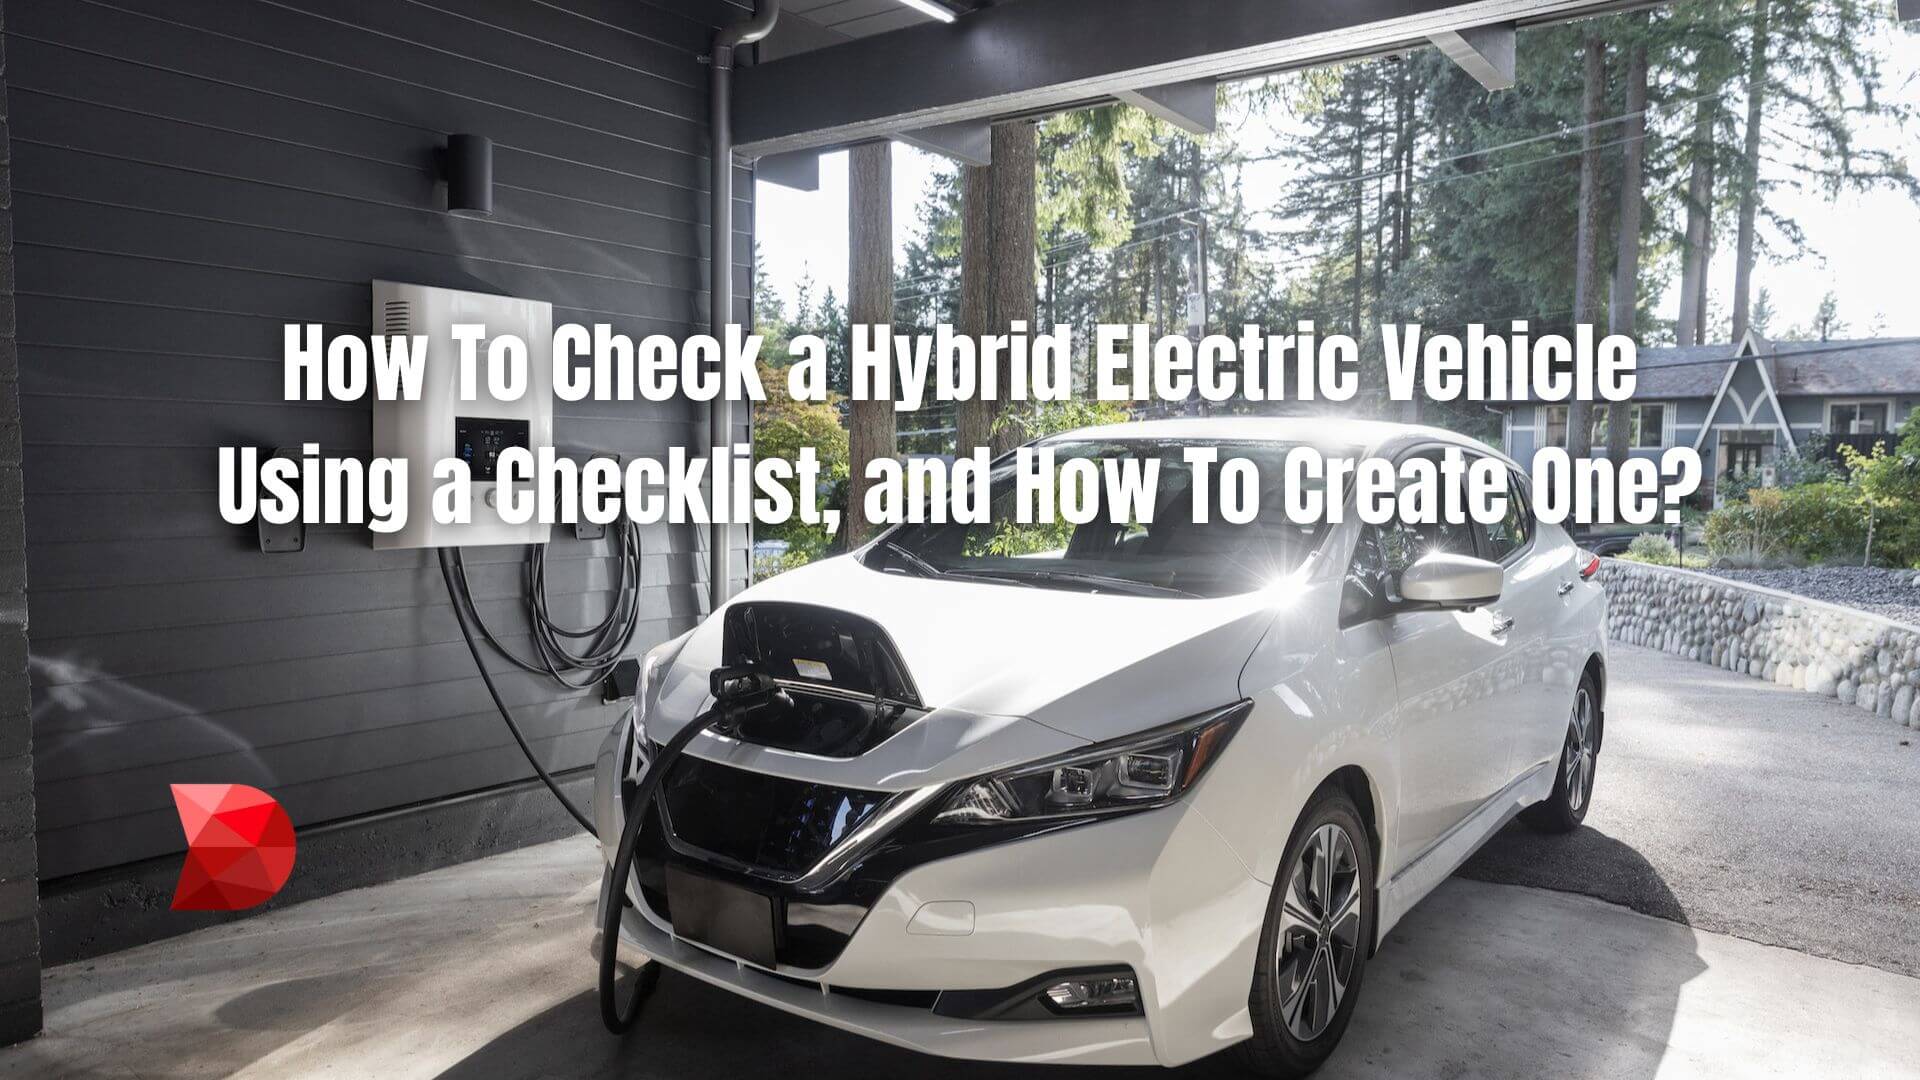 Hybrid electric cars provide improved fuel efficiency, reduced emissions, and high performance. Here's how to check them using a checklist.